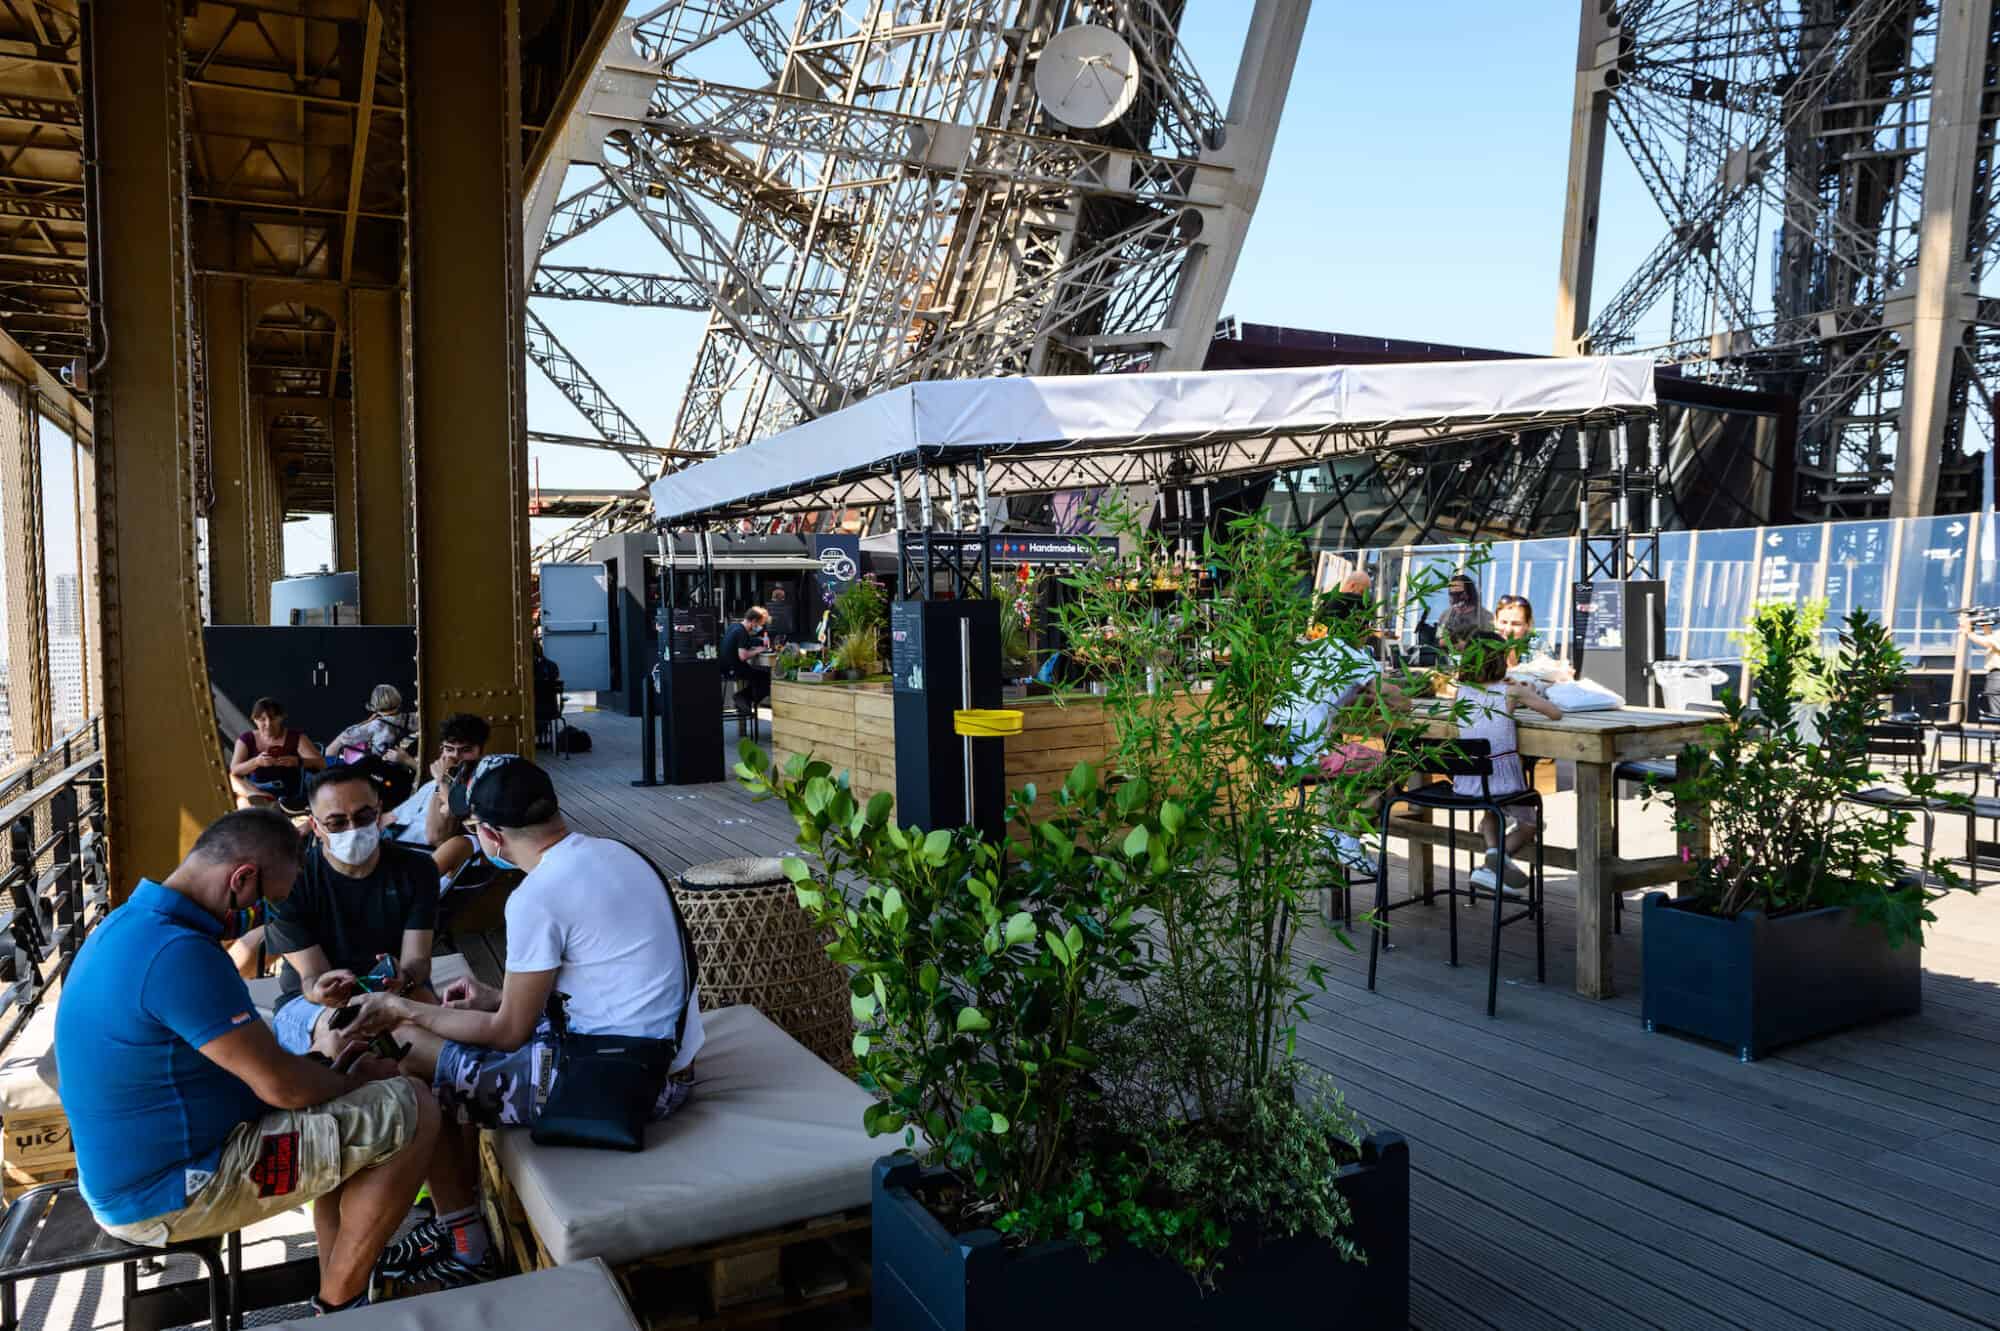 The wooden terrace of the Eiffel Tower in Paris. There are groups of people seated, some wearing face masks. You can see the pillars of the Eiffel Tower around them. There is a wooden bar in the middle with a white tarp roof. There are also some pot plants.